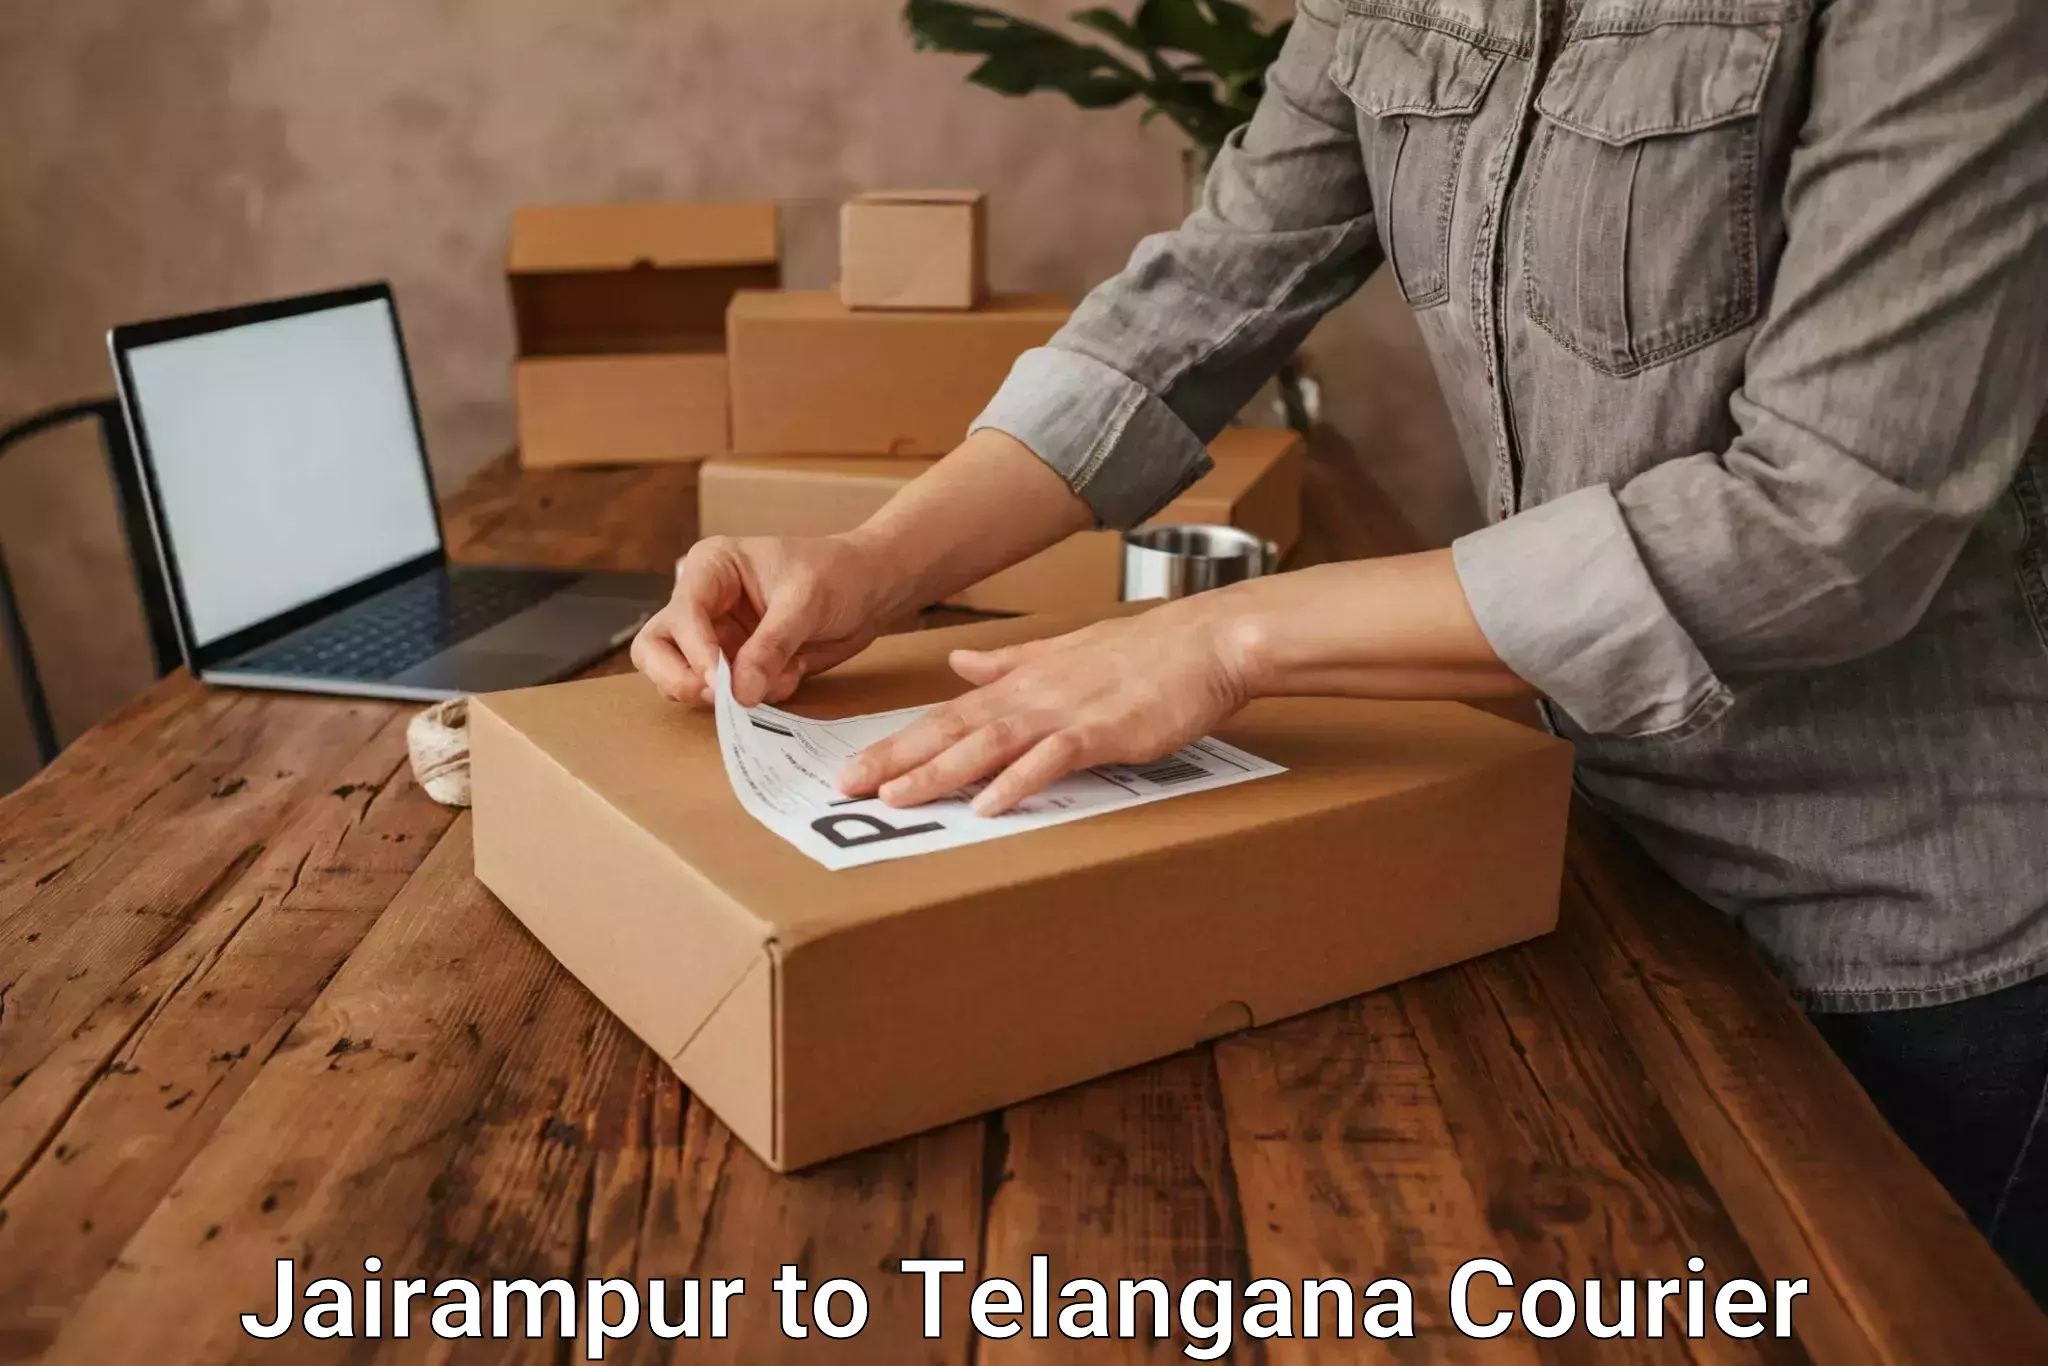 On-call courier service Jairampur to Achampet